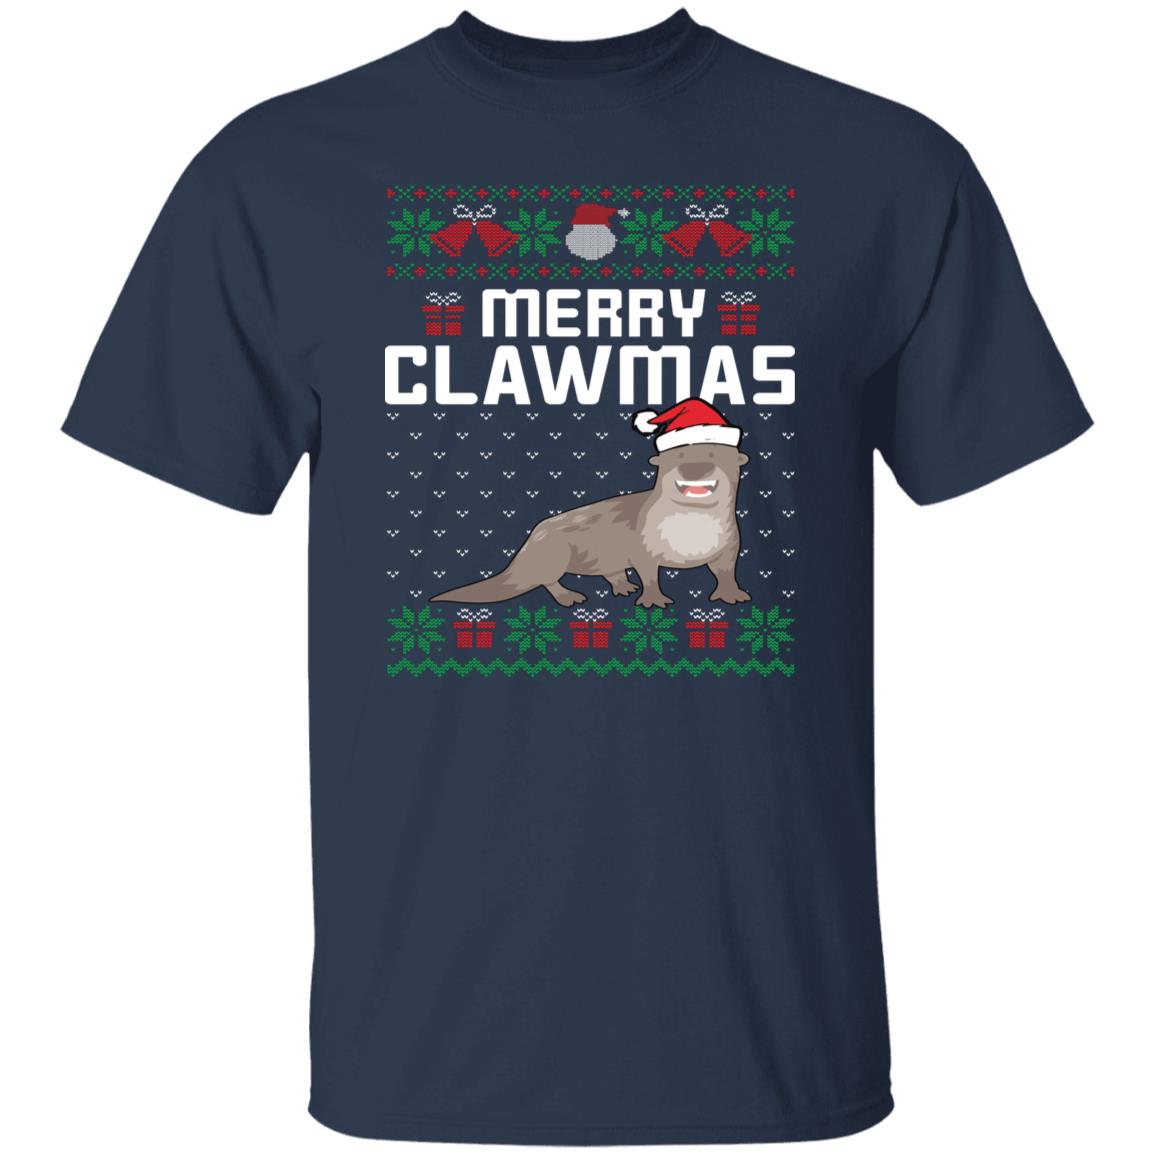 Merry Clawmas Funny Ugly Christmas Sweater Tee Shirt